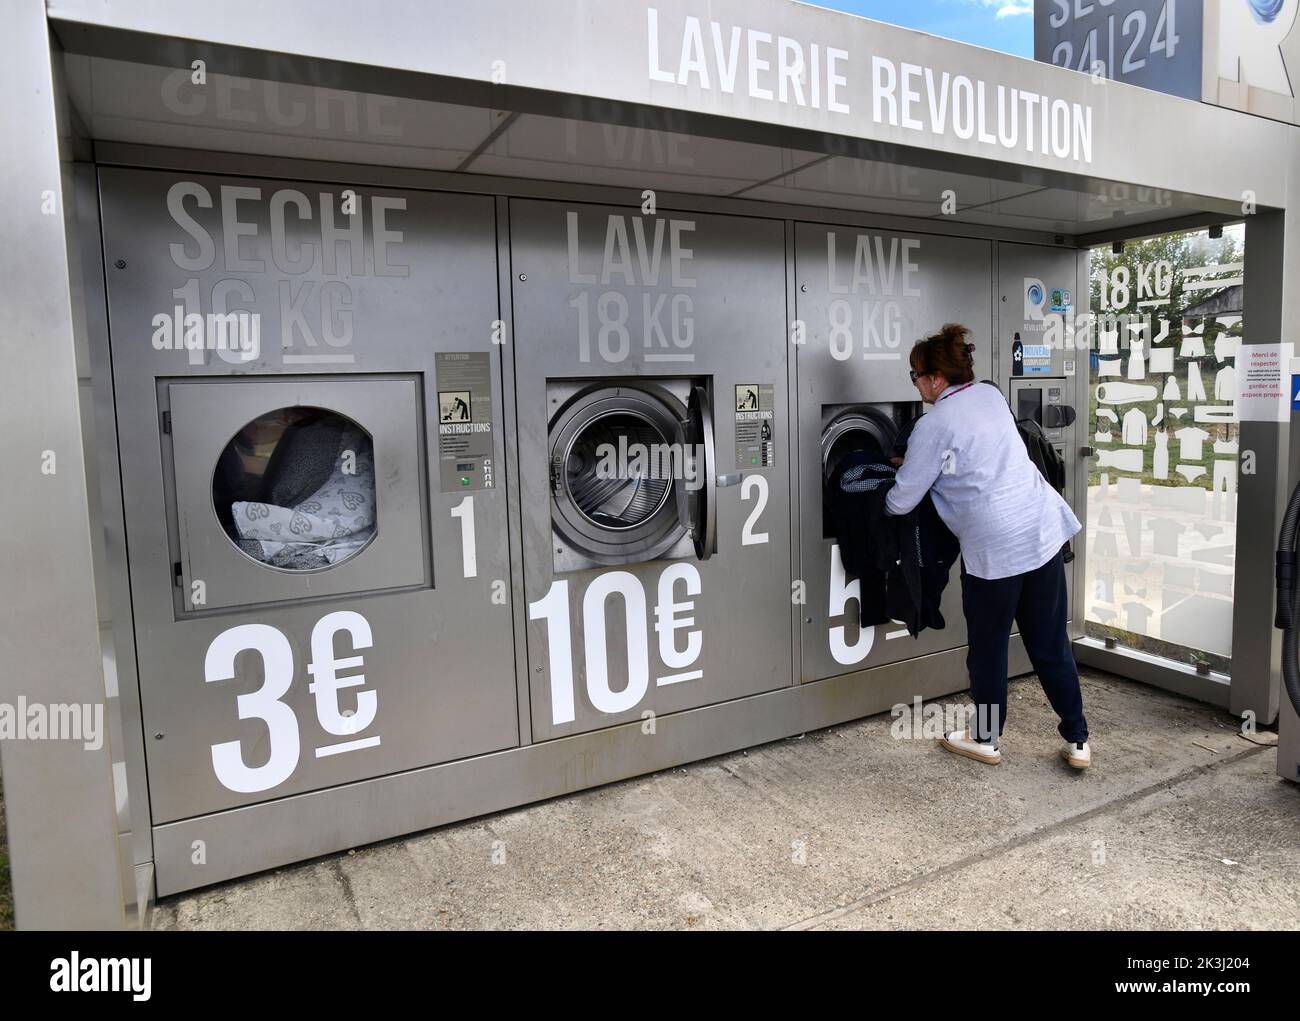 Woman using external launderette called Laverie Revolution in France Stock Photo